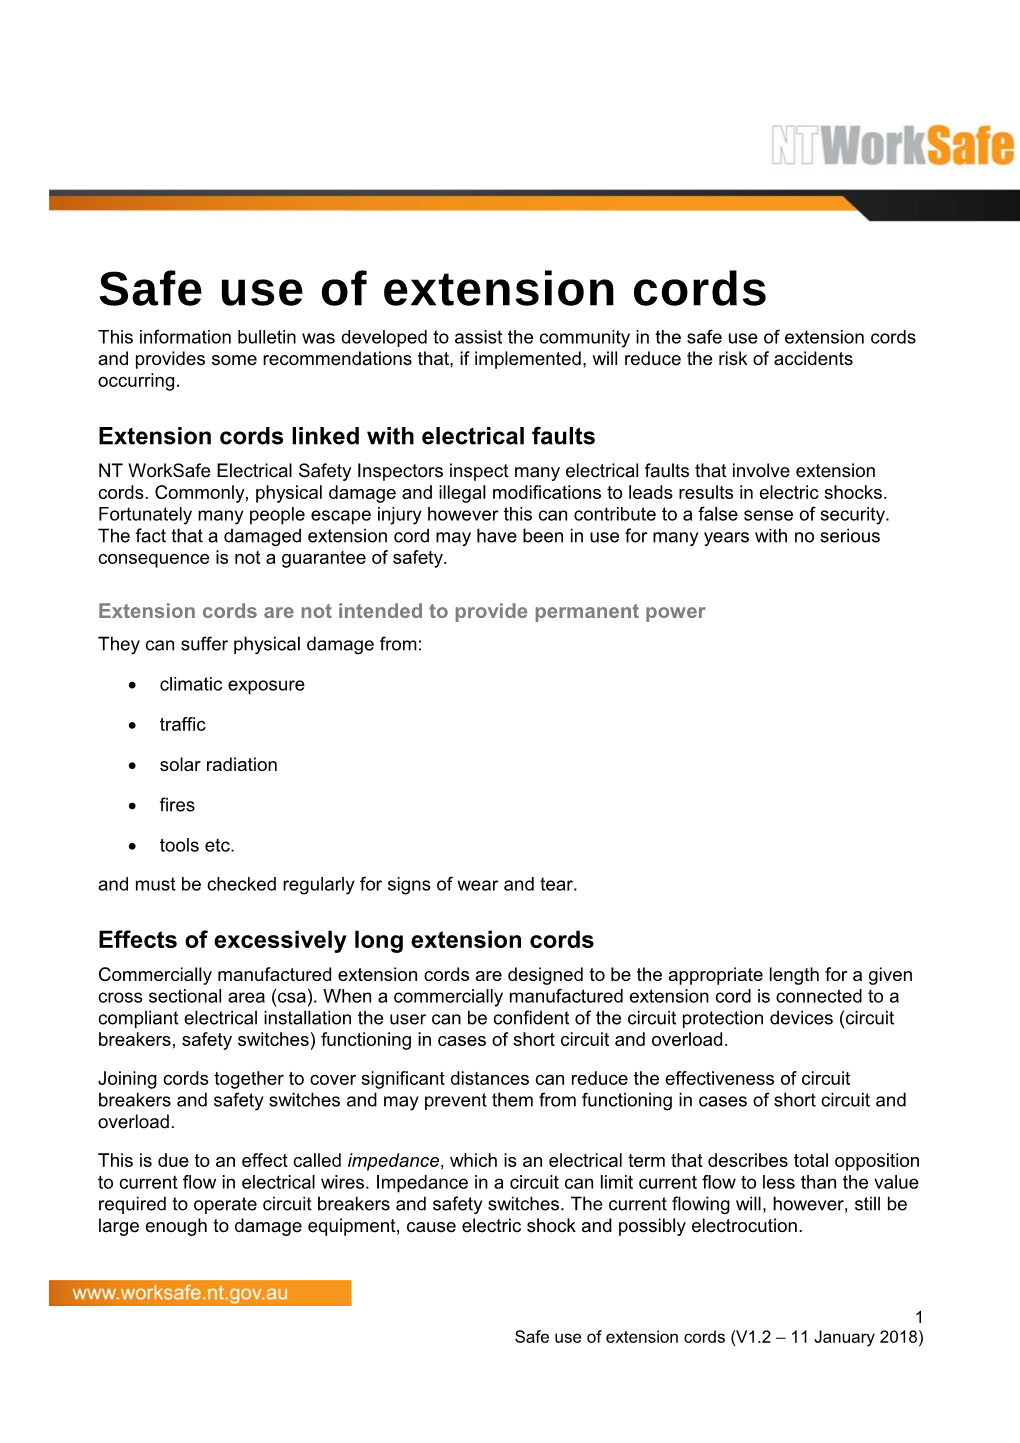 Safe Use of Extension Cords